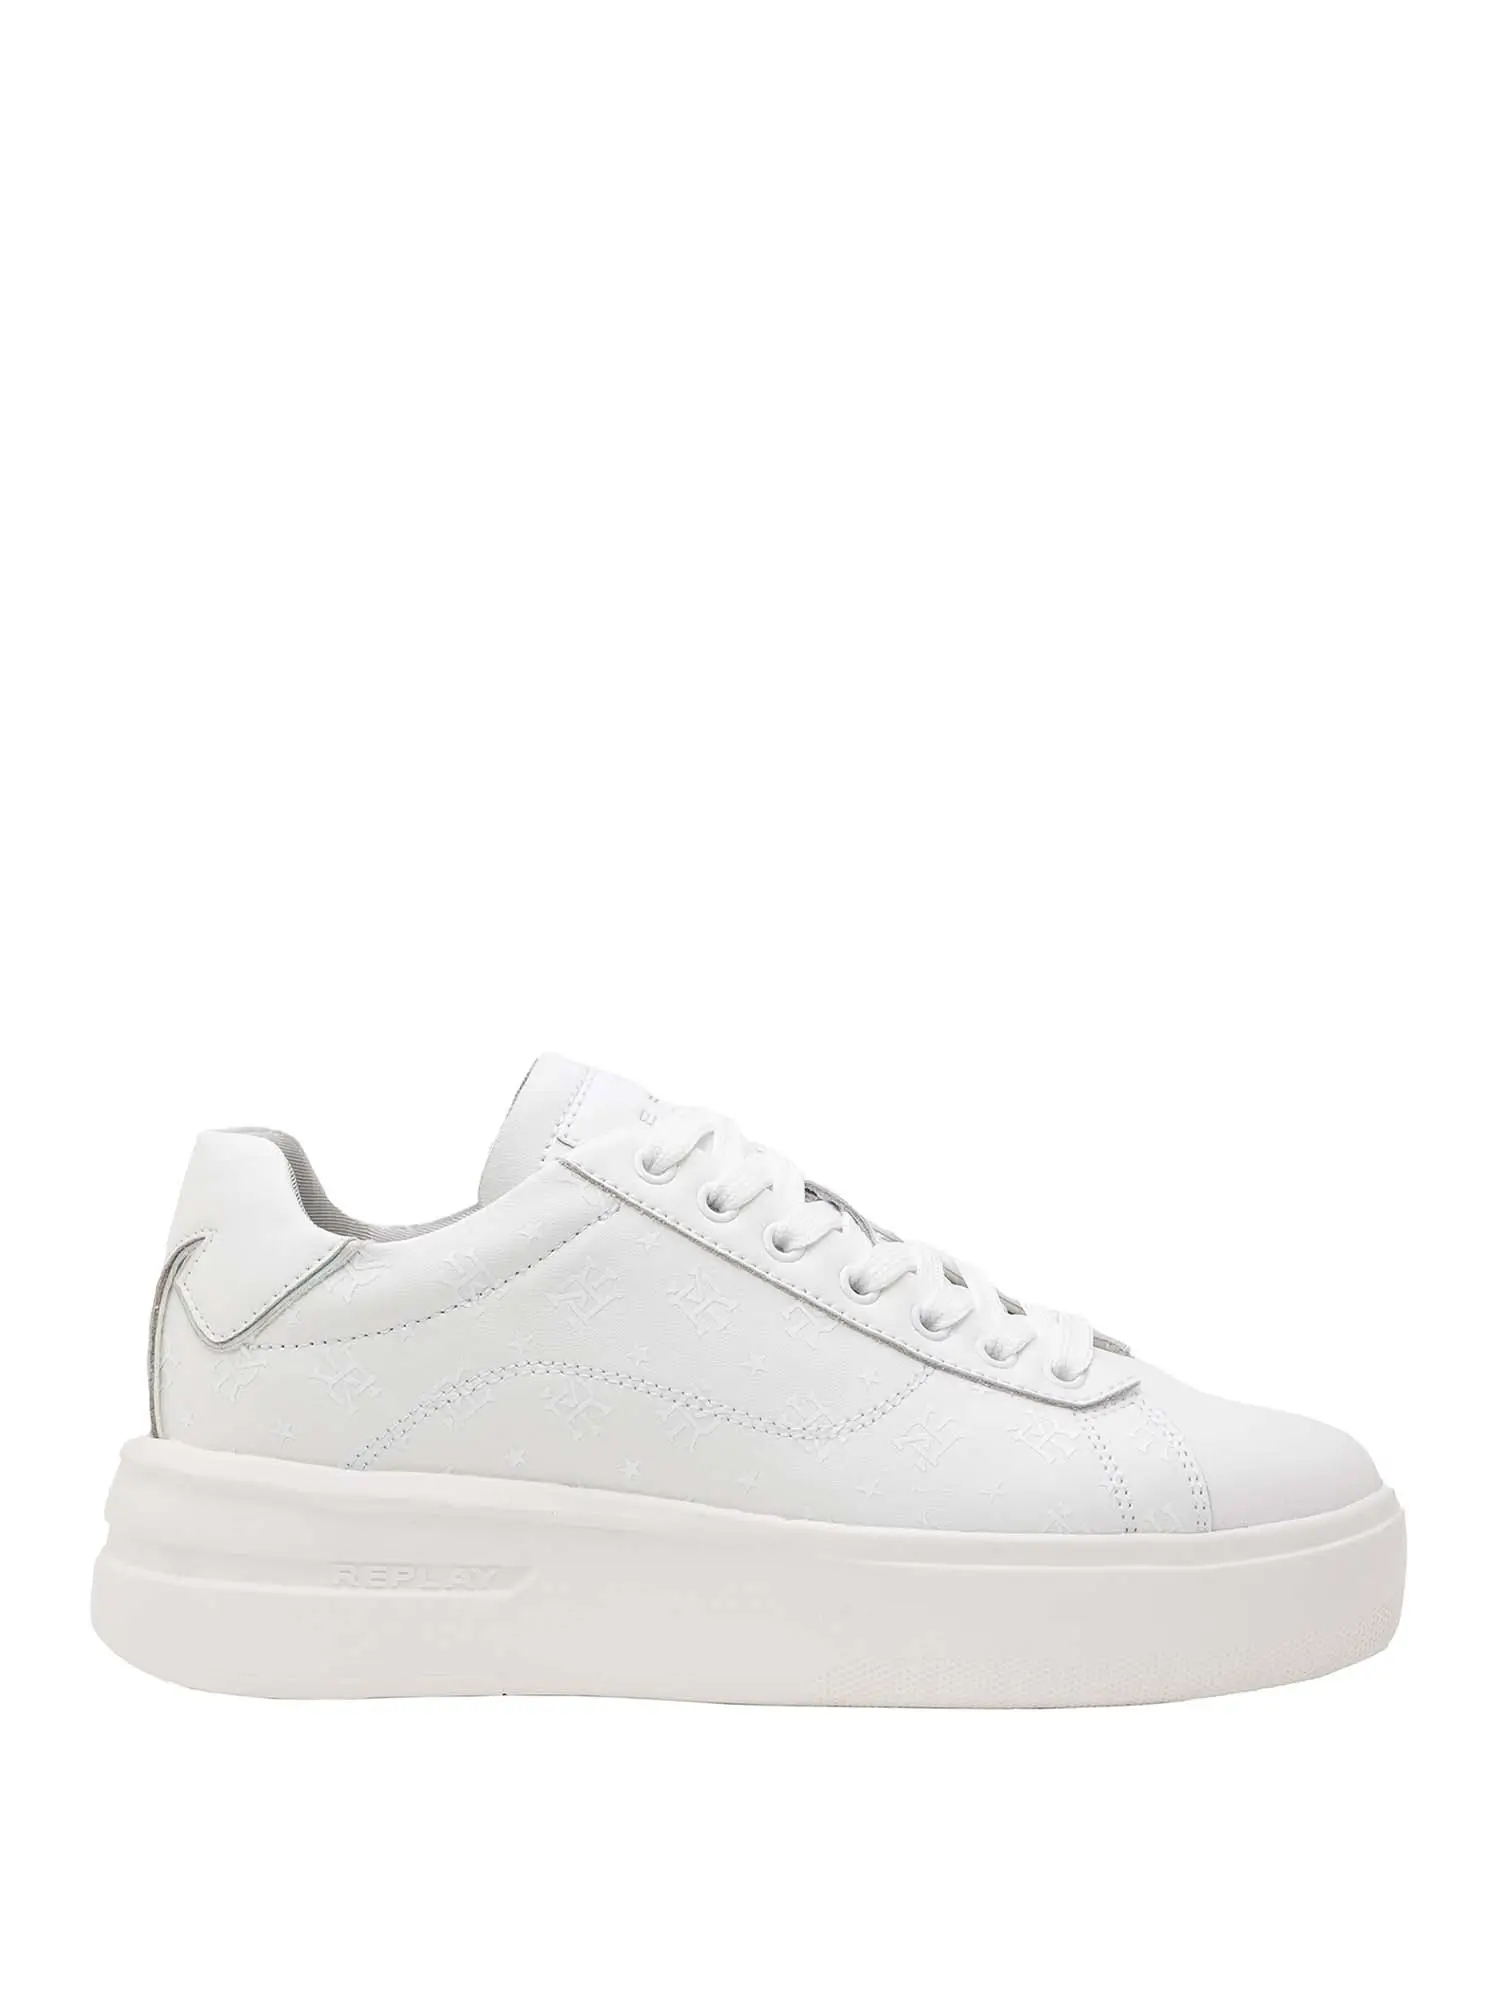 SNEAKERS DONNA - REPLAY - RZ4N0010L - BIANCO, 38